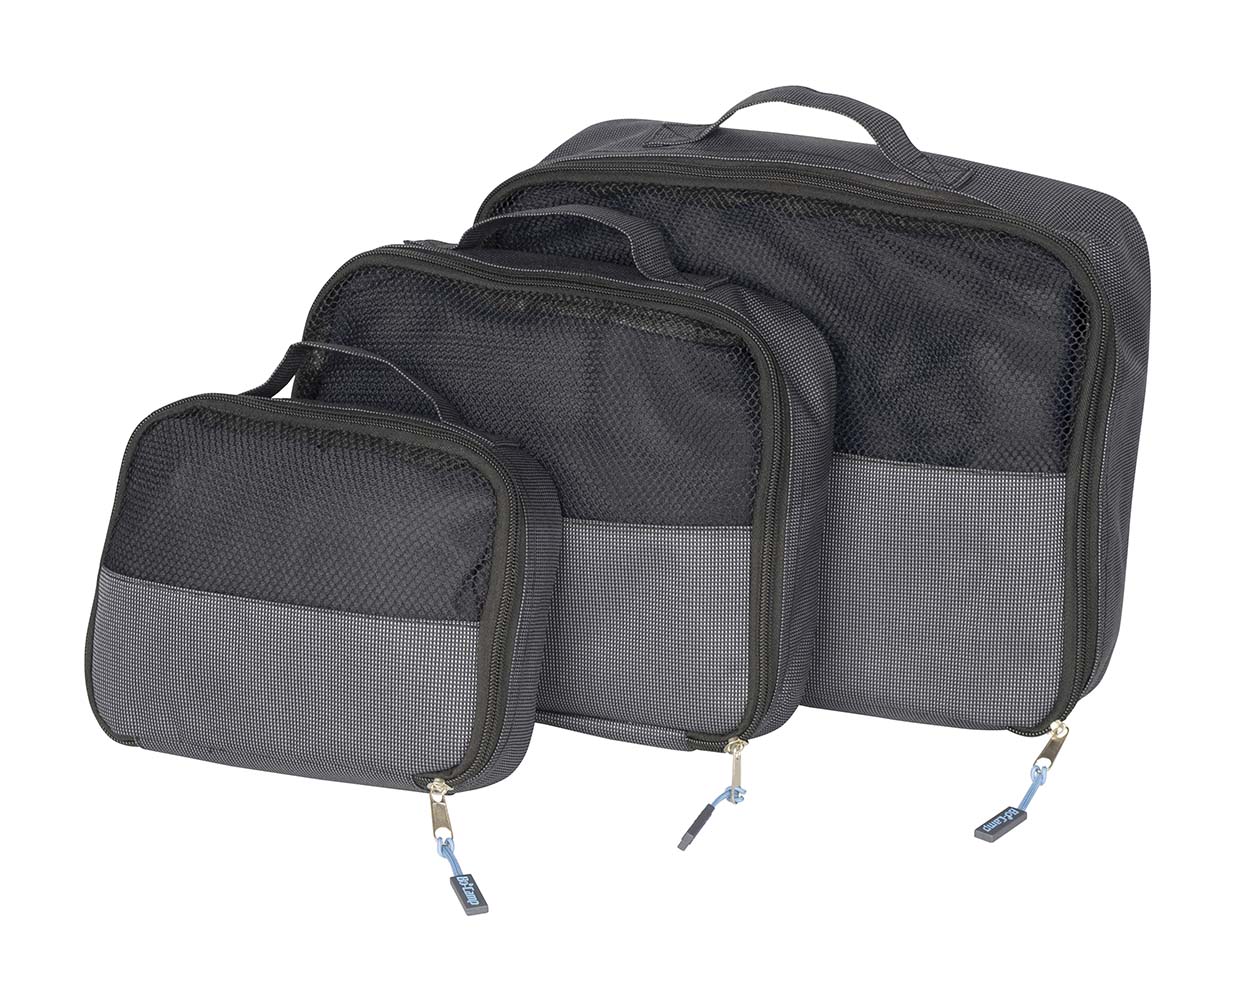 Bo-Camp - Travel pack cubes - 3 Pieces - 3 Sizes